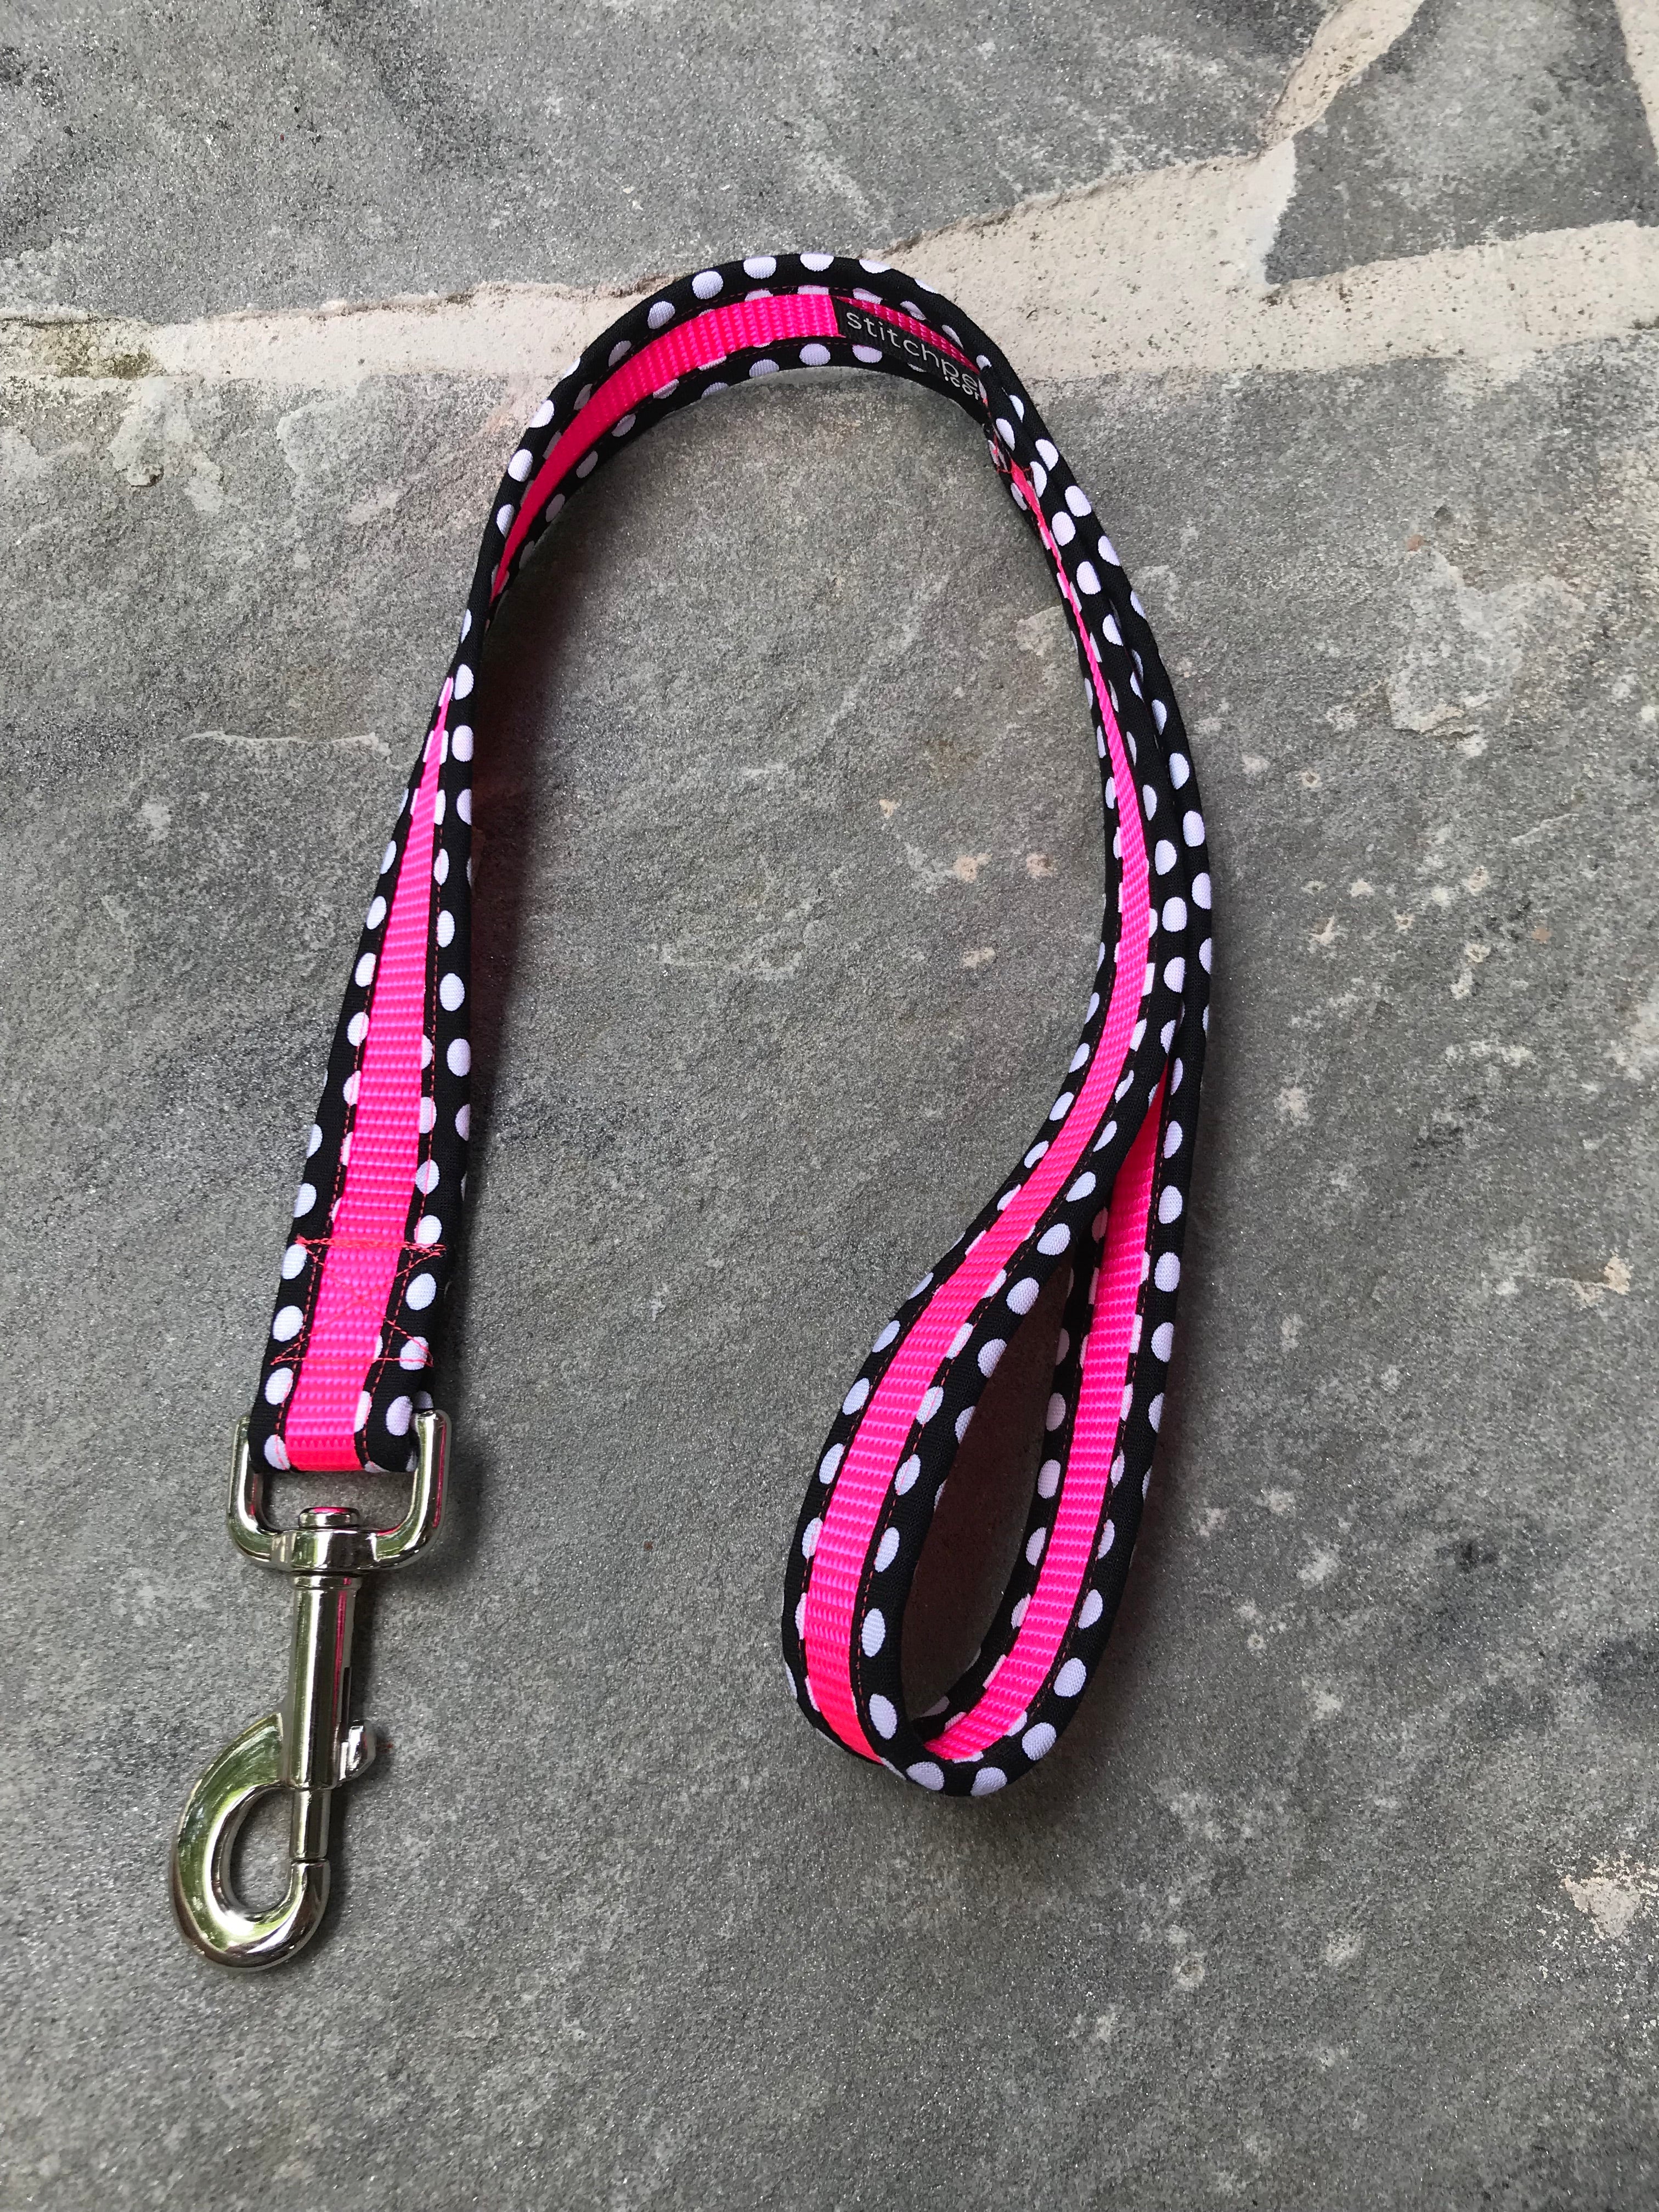 1" Short Lead for Dogs | Dot Pink